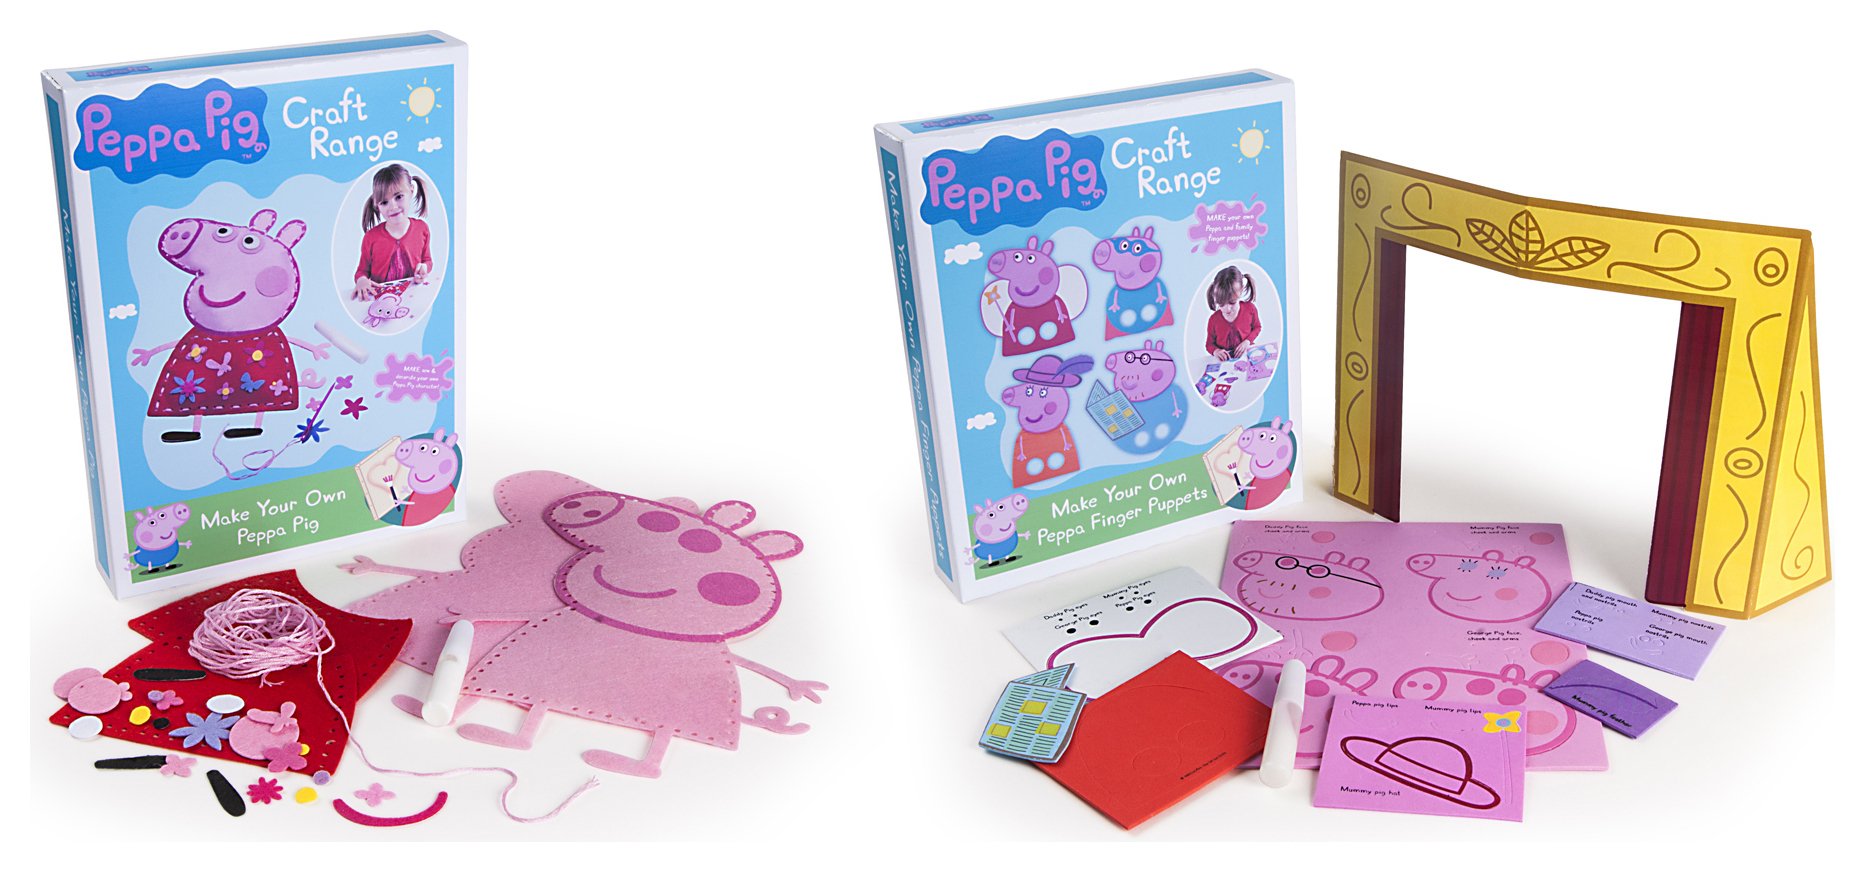 Peppa Pig Make Your Own Peppa Puppet Kit. review